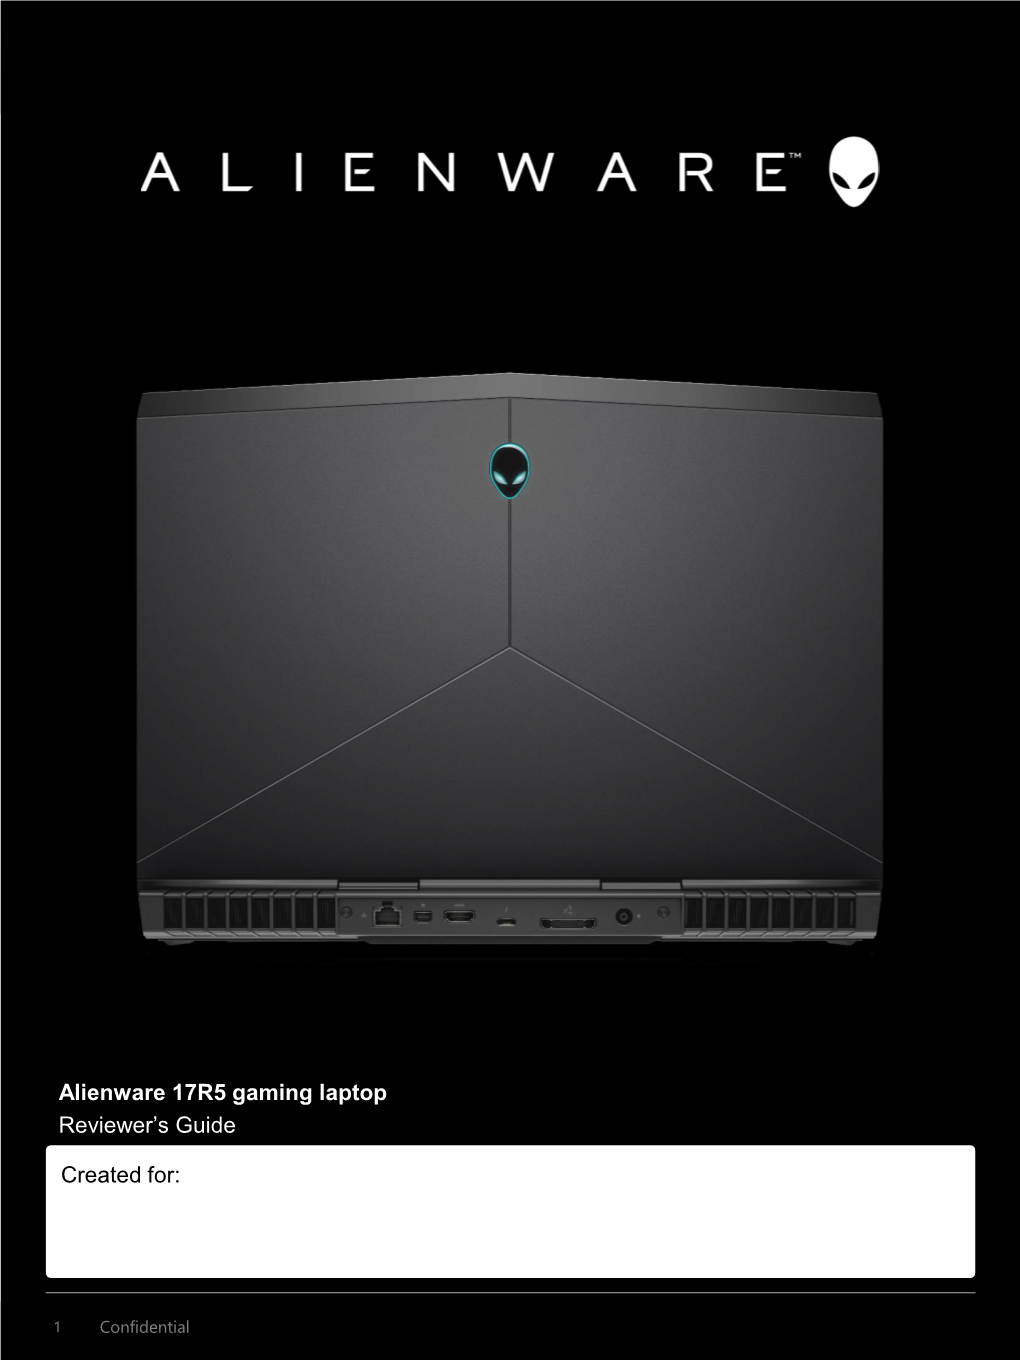 Alienware 17 Reviewers Guide